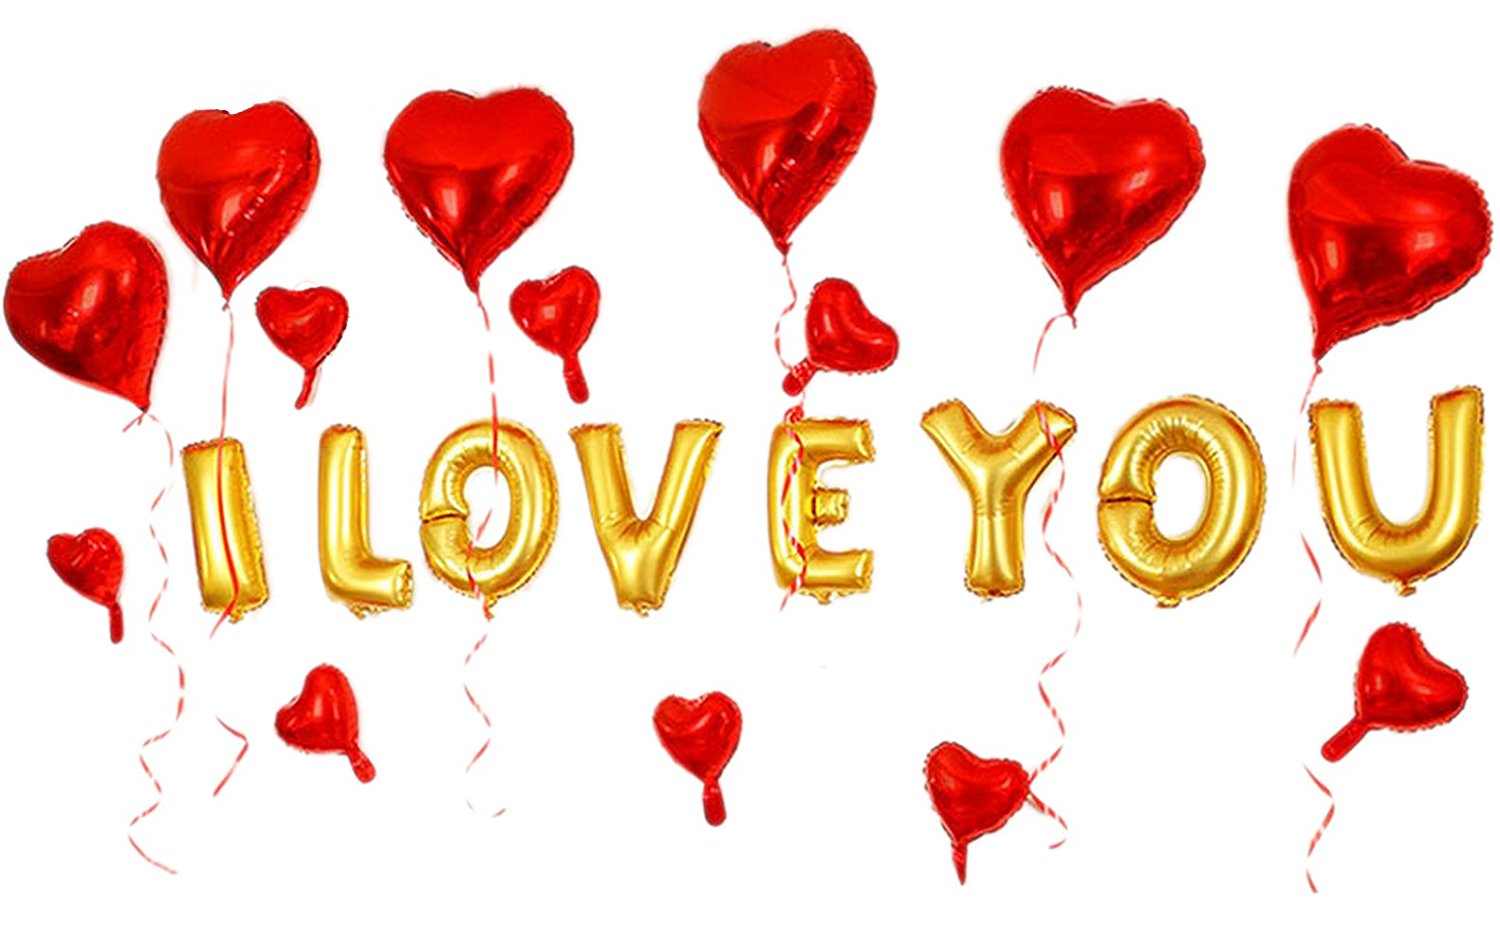 What a sweet surprise it would be to walk into this set of balloons! $14 @amazon, GOER 16 Inch I LOVE YOU Gold Alphabet Letters Foil Balloons Set for Valentine's Day 